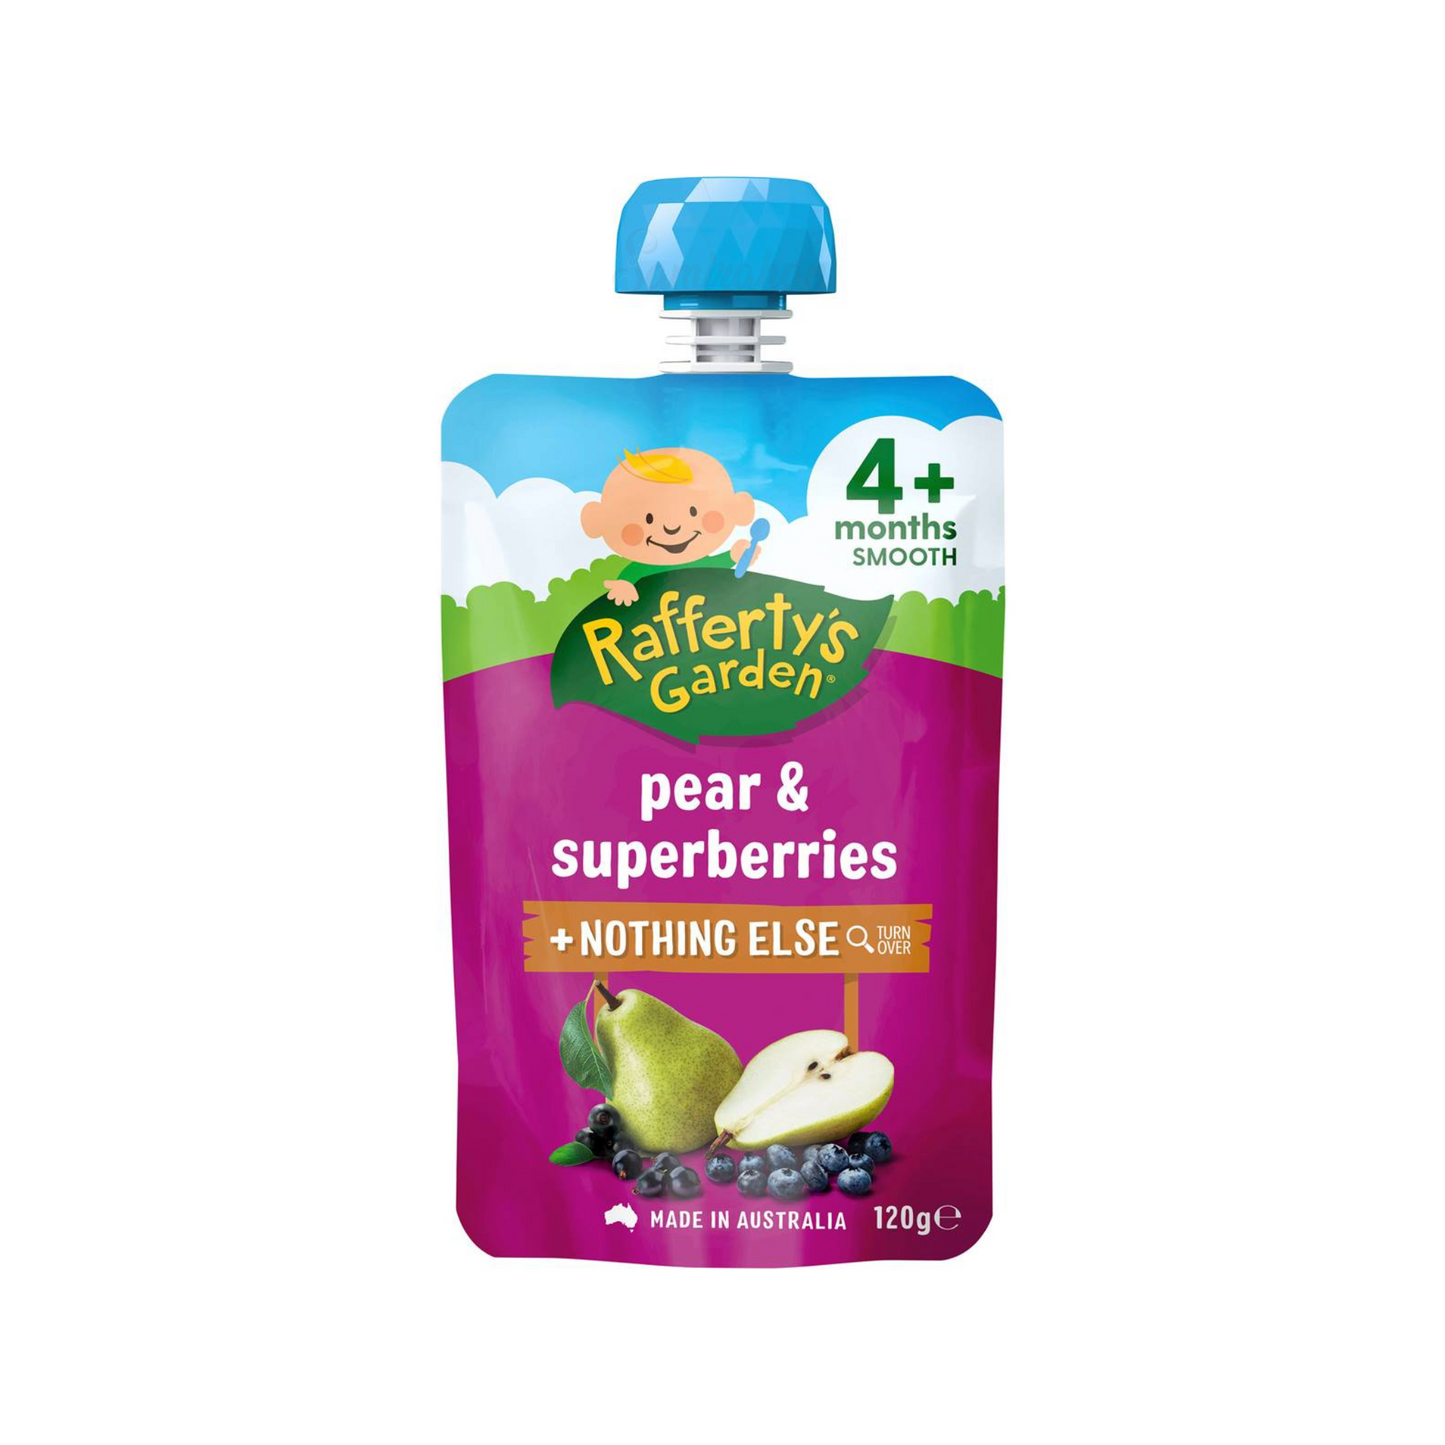 Rafferty's Garden Pear & Superberries Baby Food Pouch 6+ Months is made from premium Australian meat fruits & vegetables. No artificial colour or flavor. Halal certified. Best imported foreign Australian Aussie genuine authentic premium quality real child snack healthy price in Dhaka Chittagong Sylhet Bangladesh.